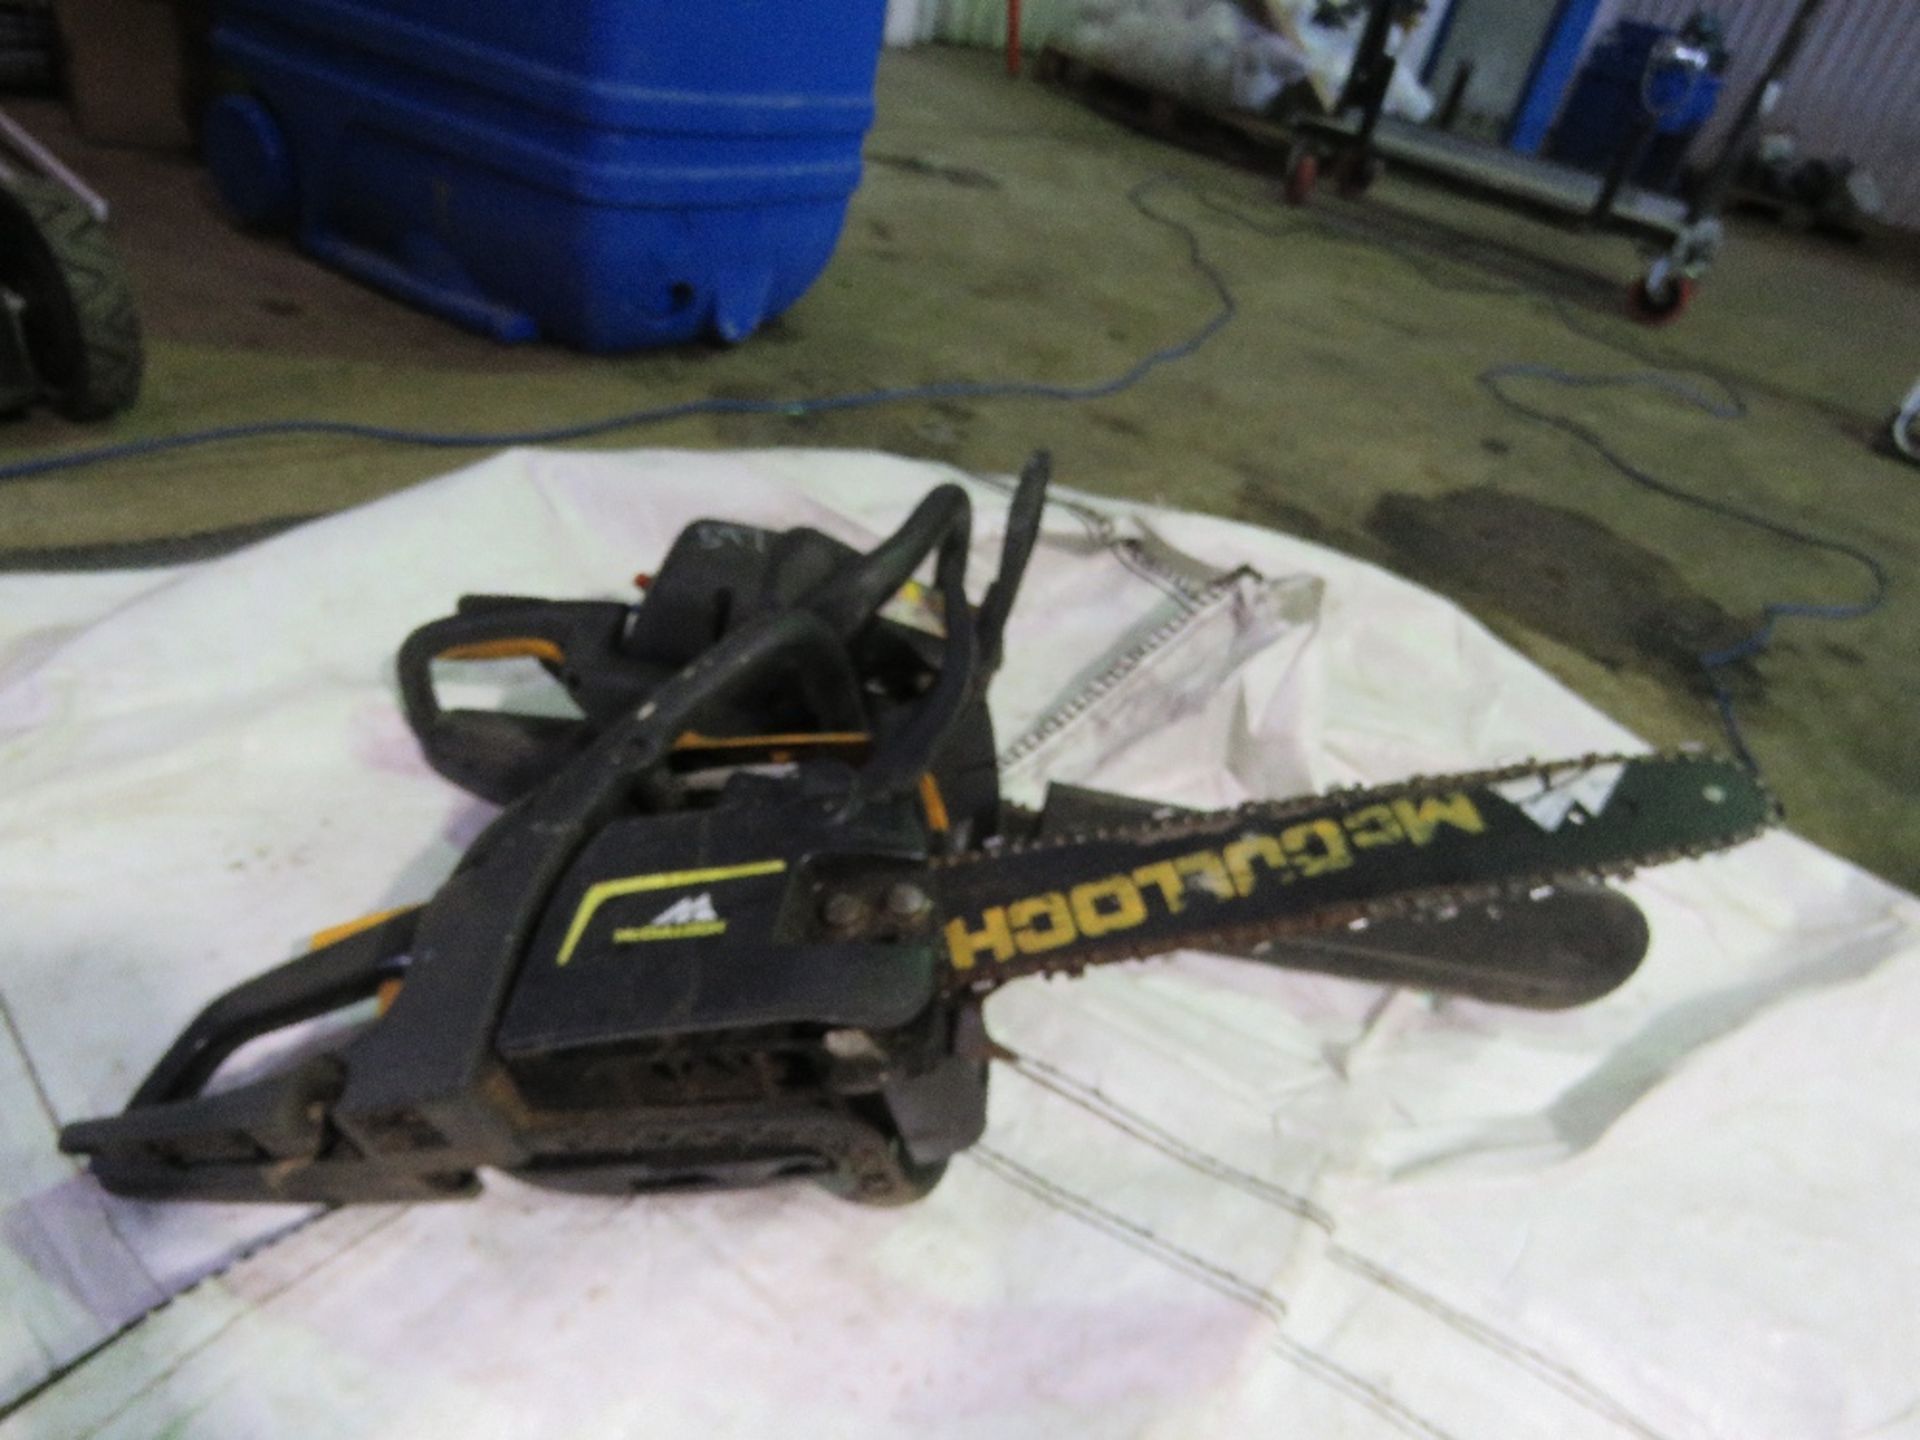 2 X McCULLOCH PETROL CHAINSAWS. - Image 3 of 3